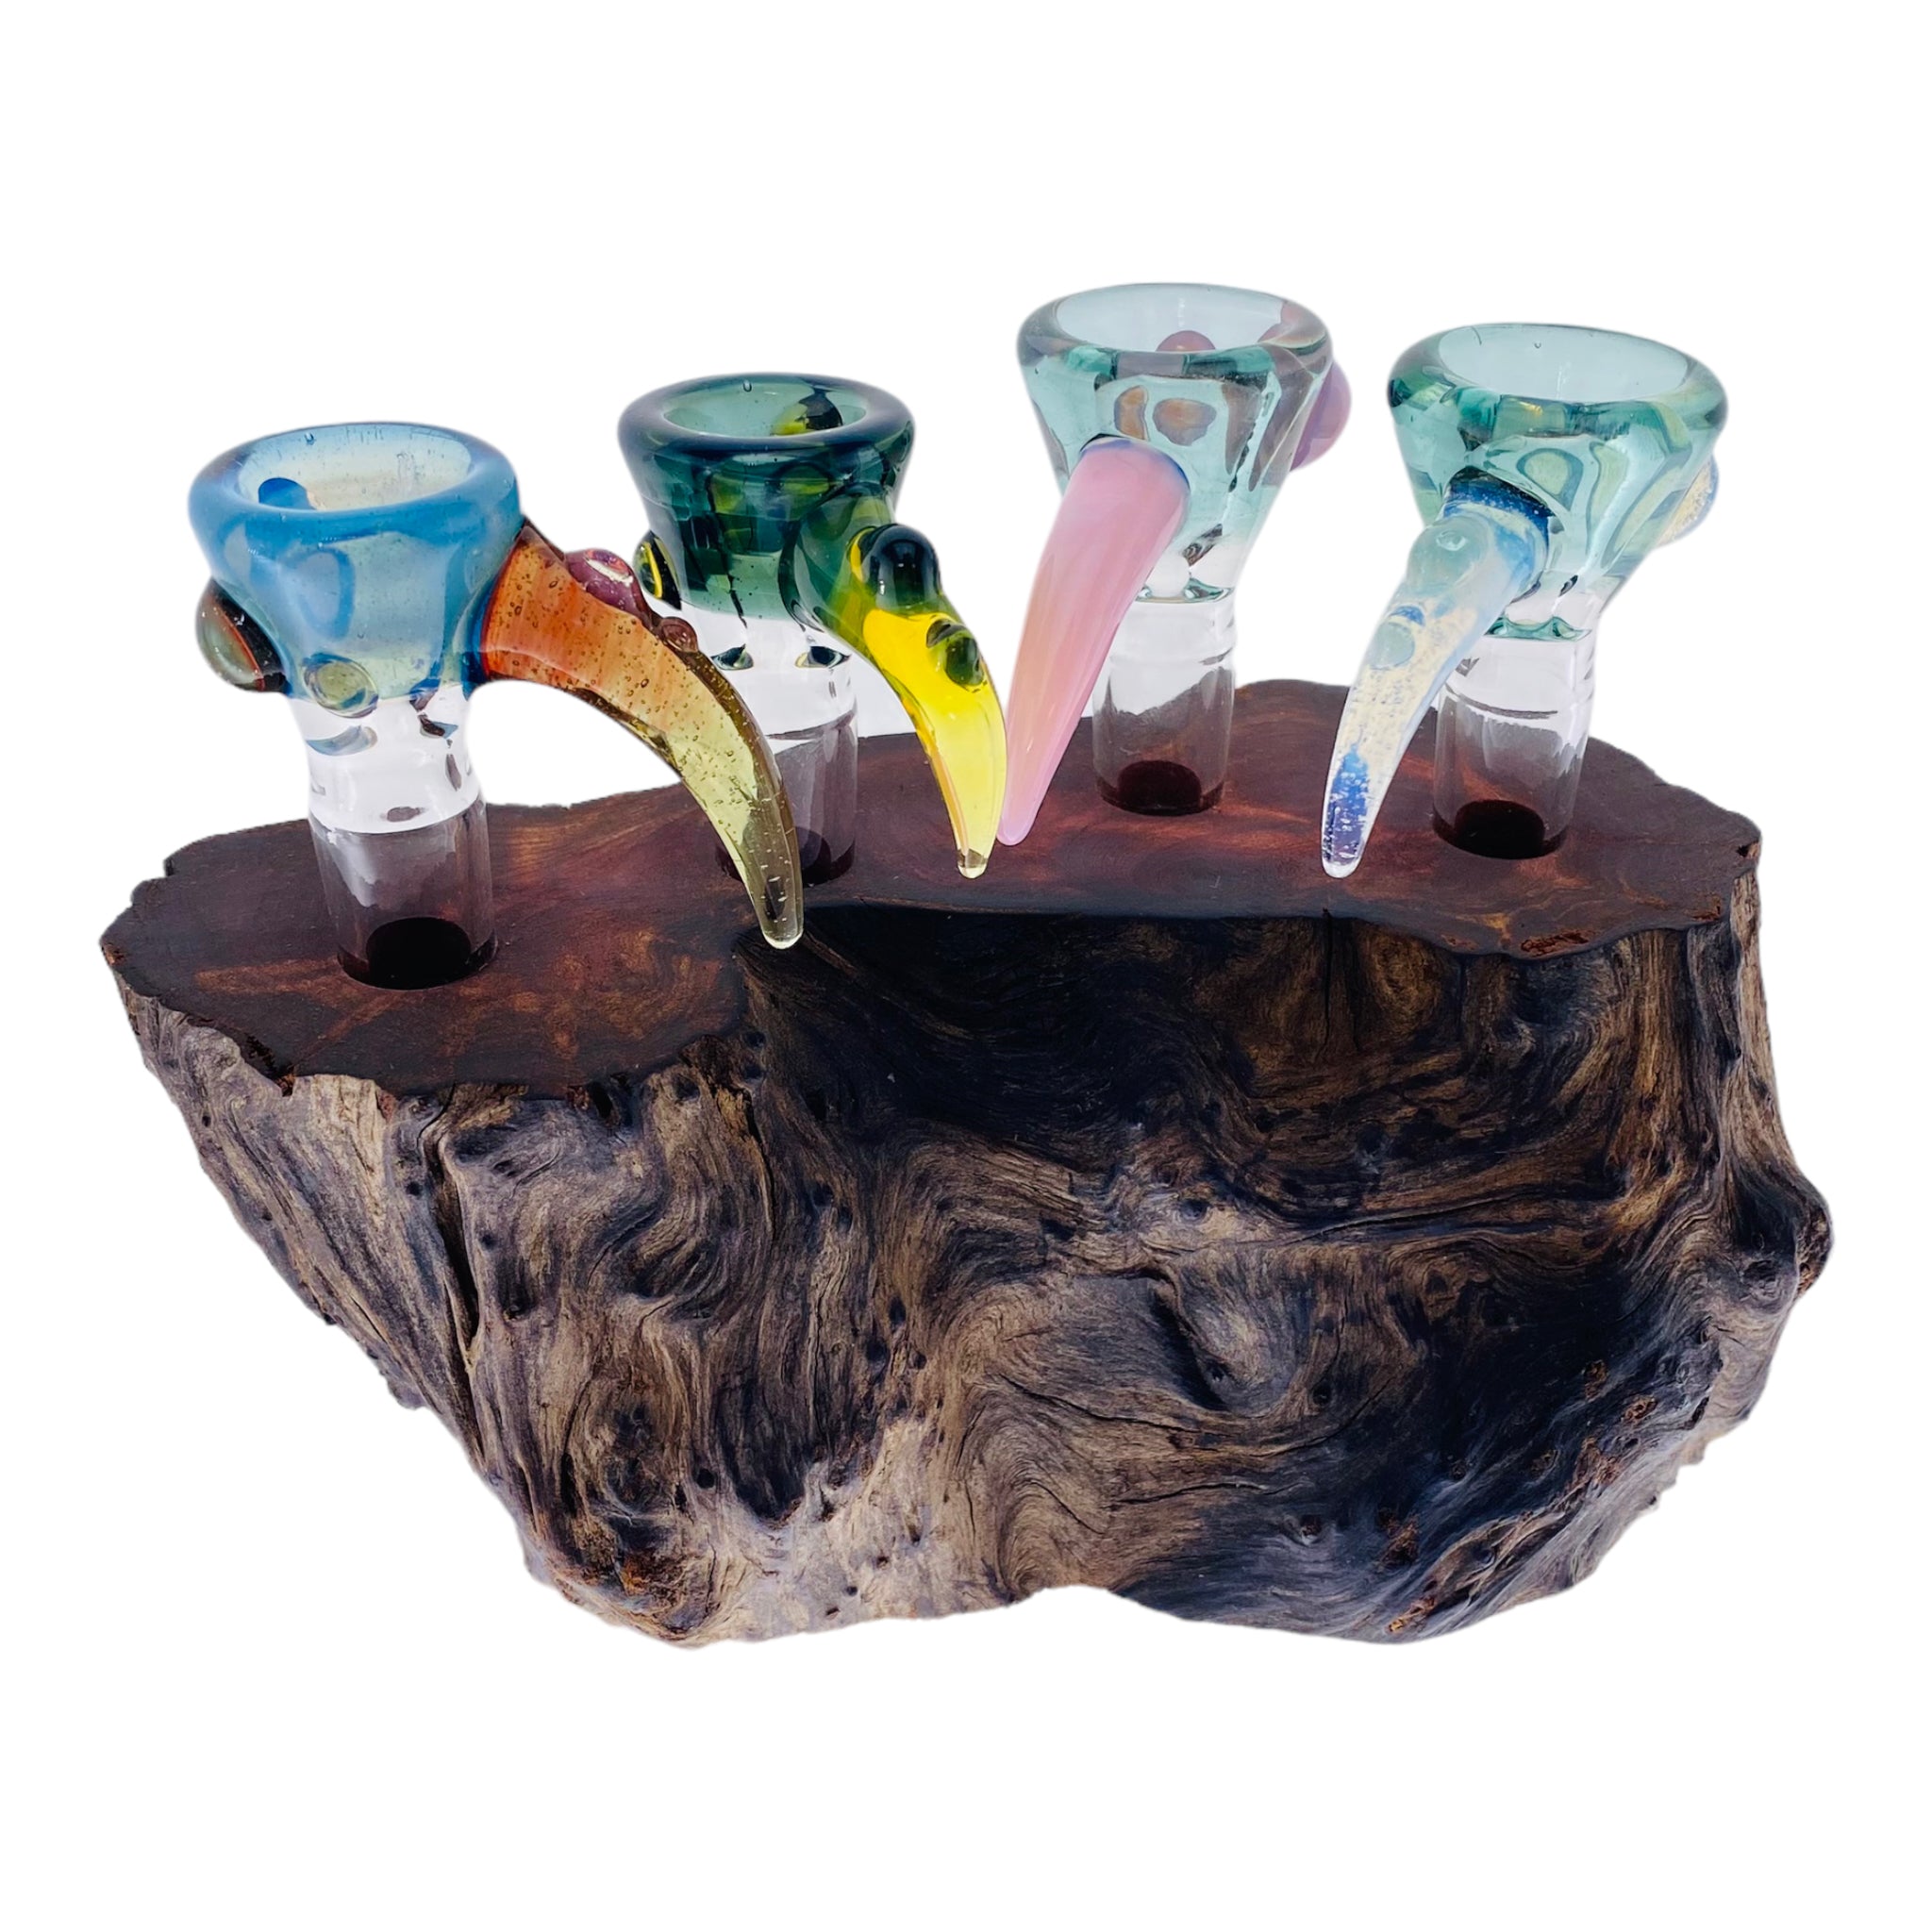 4 Hole Wood Display Stand Holder For 14mm Bong Bowl Pieces Or Quartz Bangers - Red Wood Burl With Live Edge